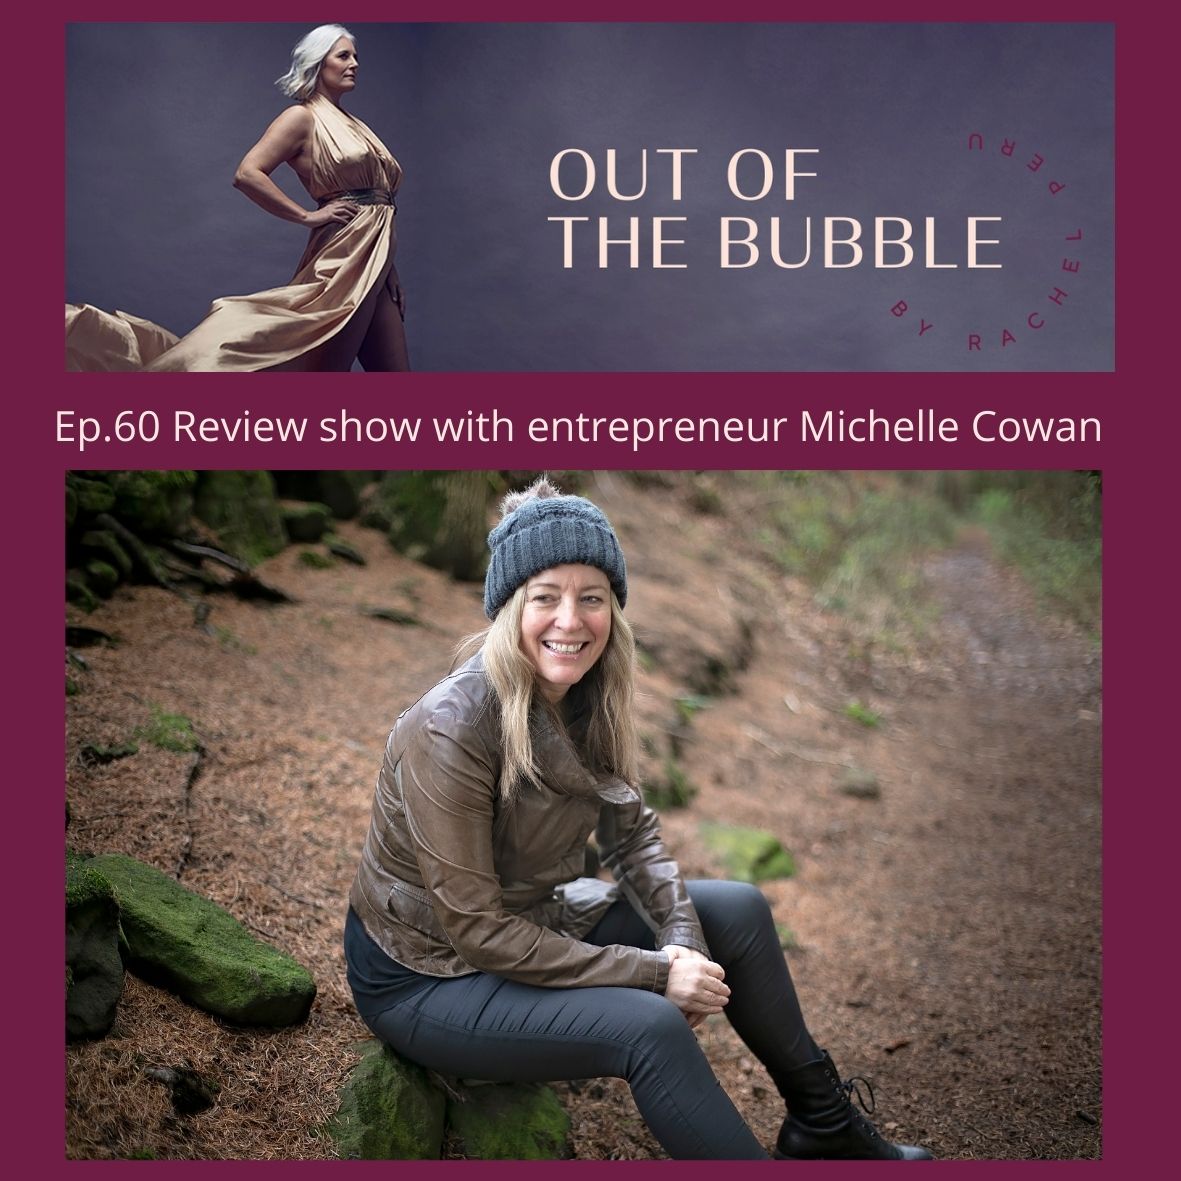 Ep.60- Liberte Free to Be review show with entrepreneur Michelle Cowan, founder of Justo Software.